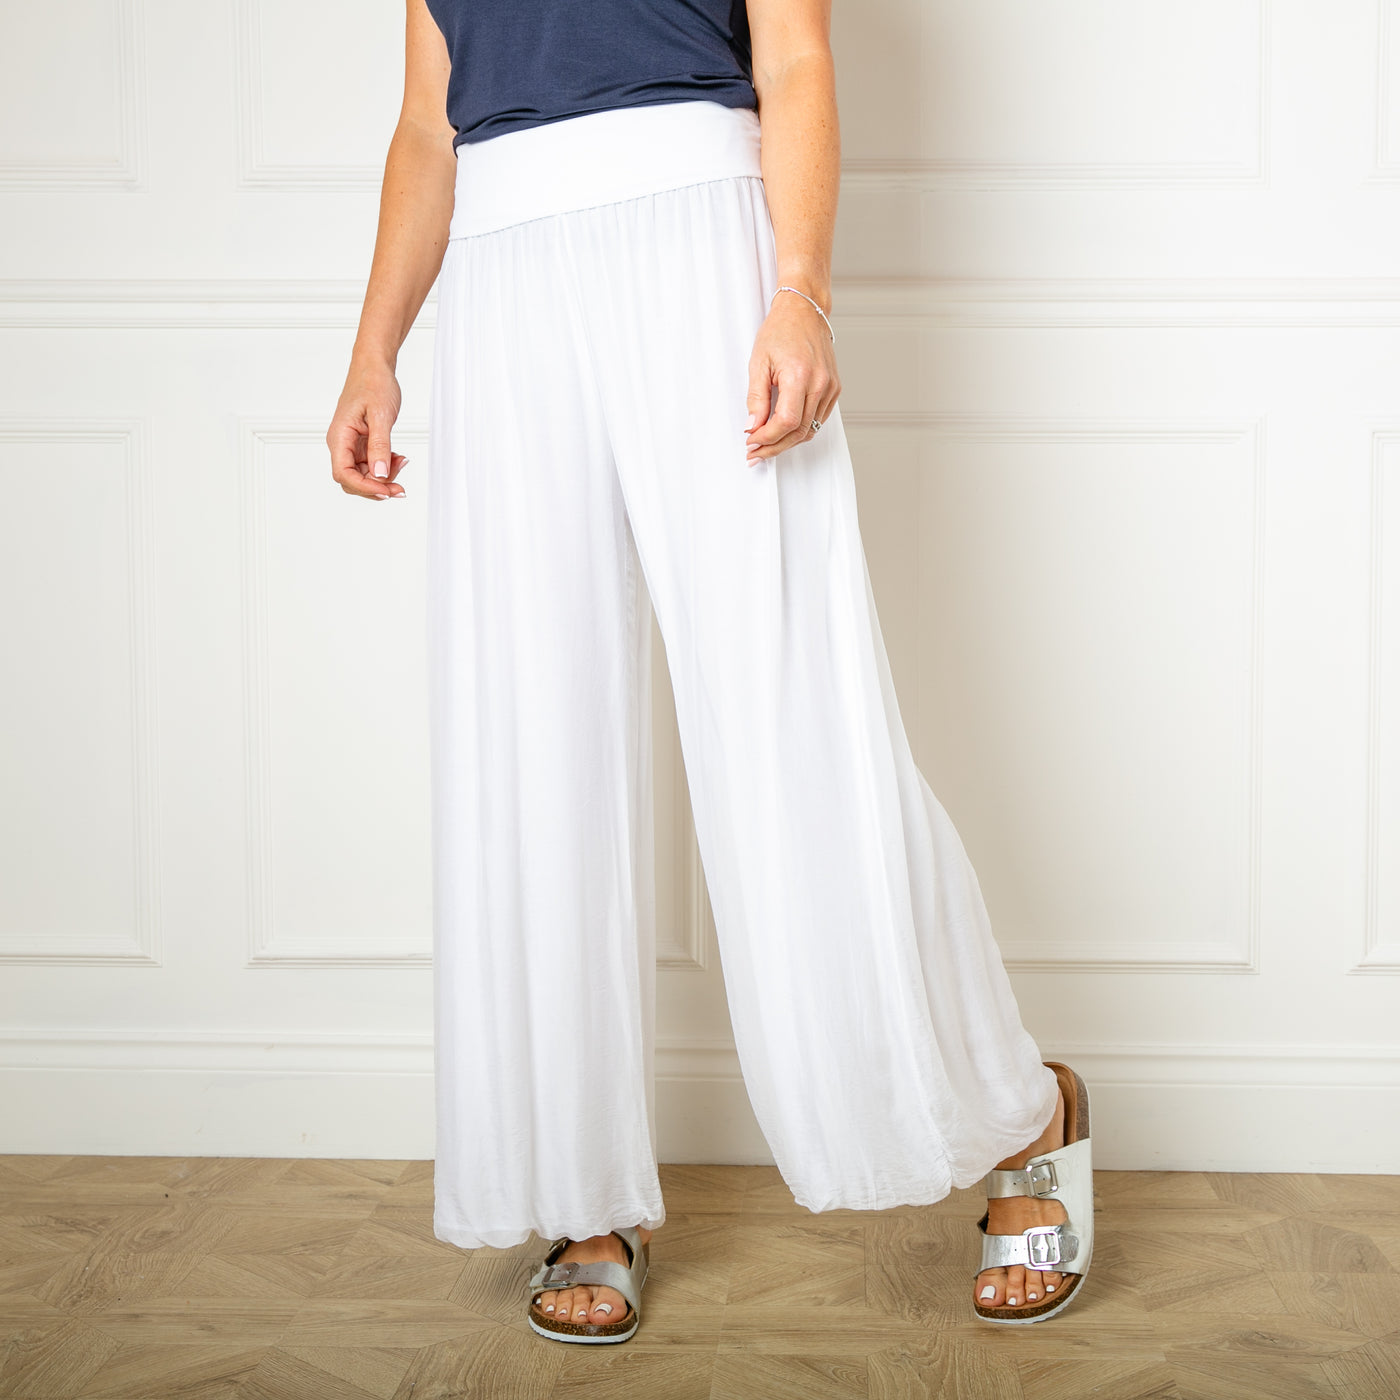 The white Silk Blend Trousers, made from a beautiful silk material with a stretchy jersey lining underneath